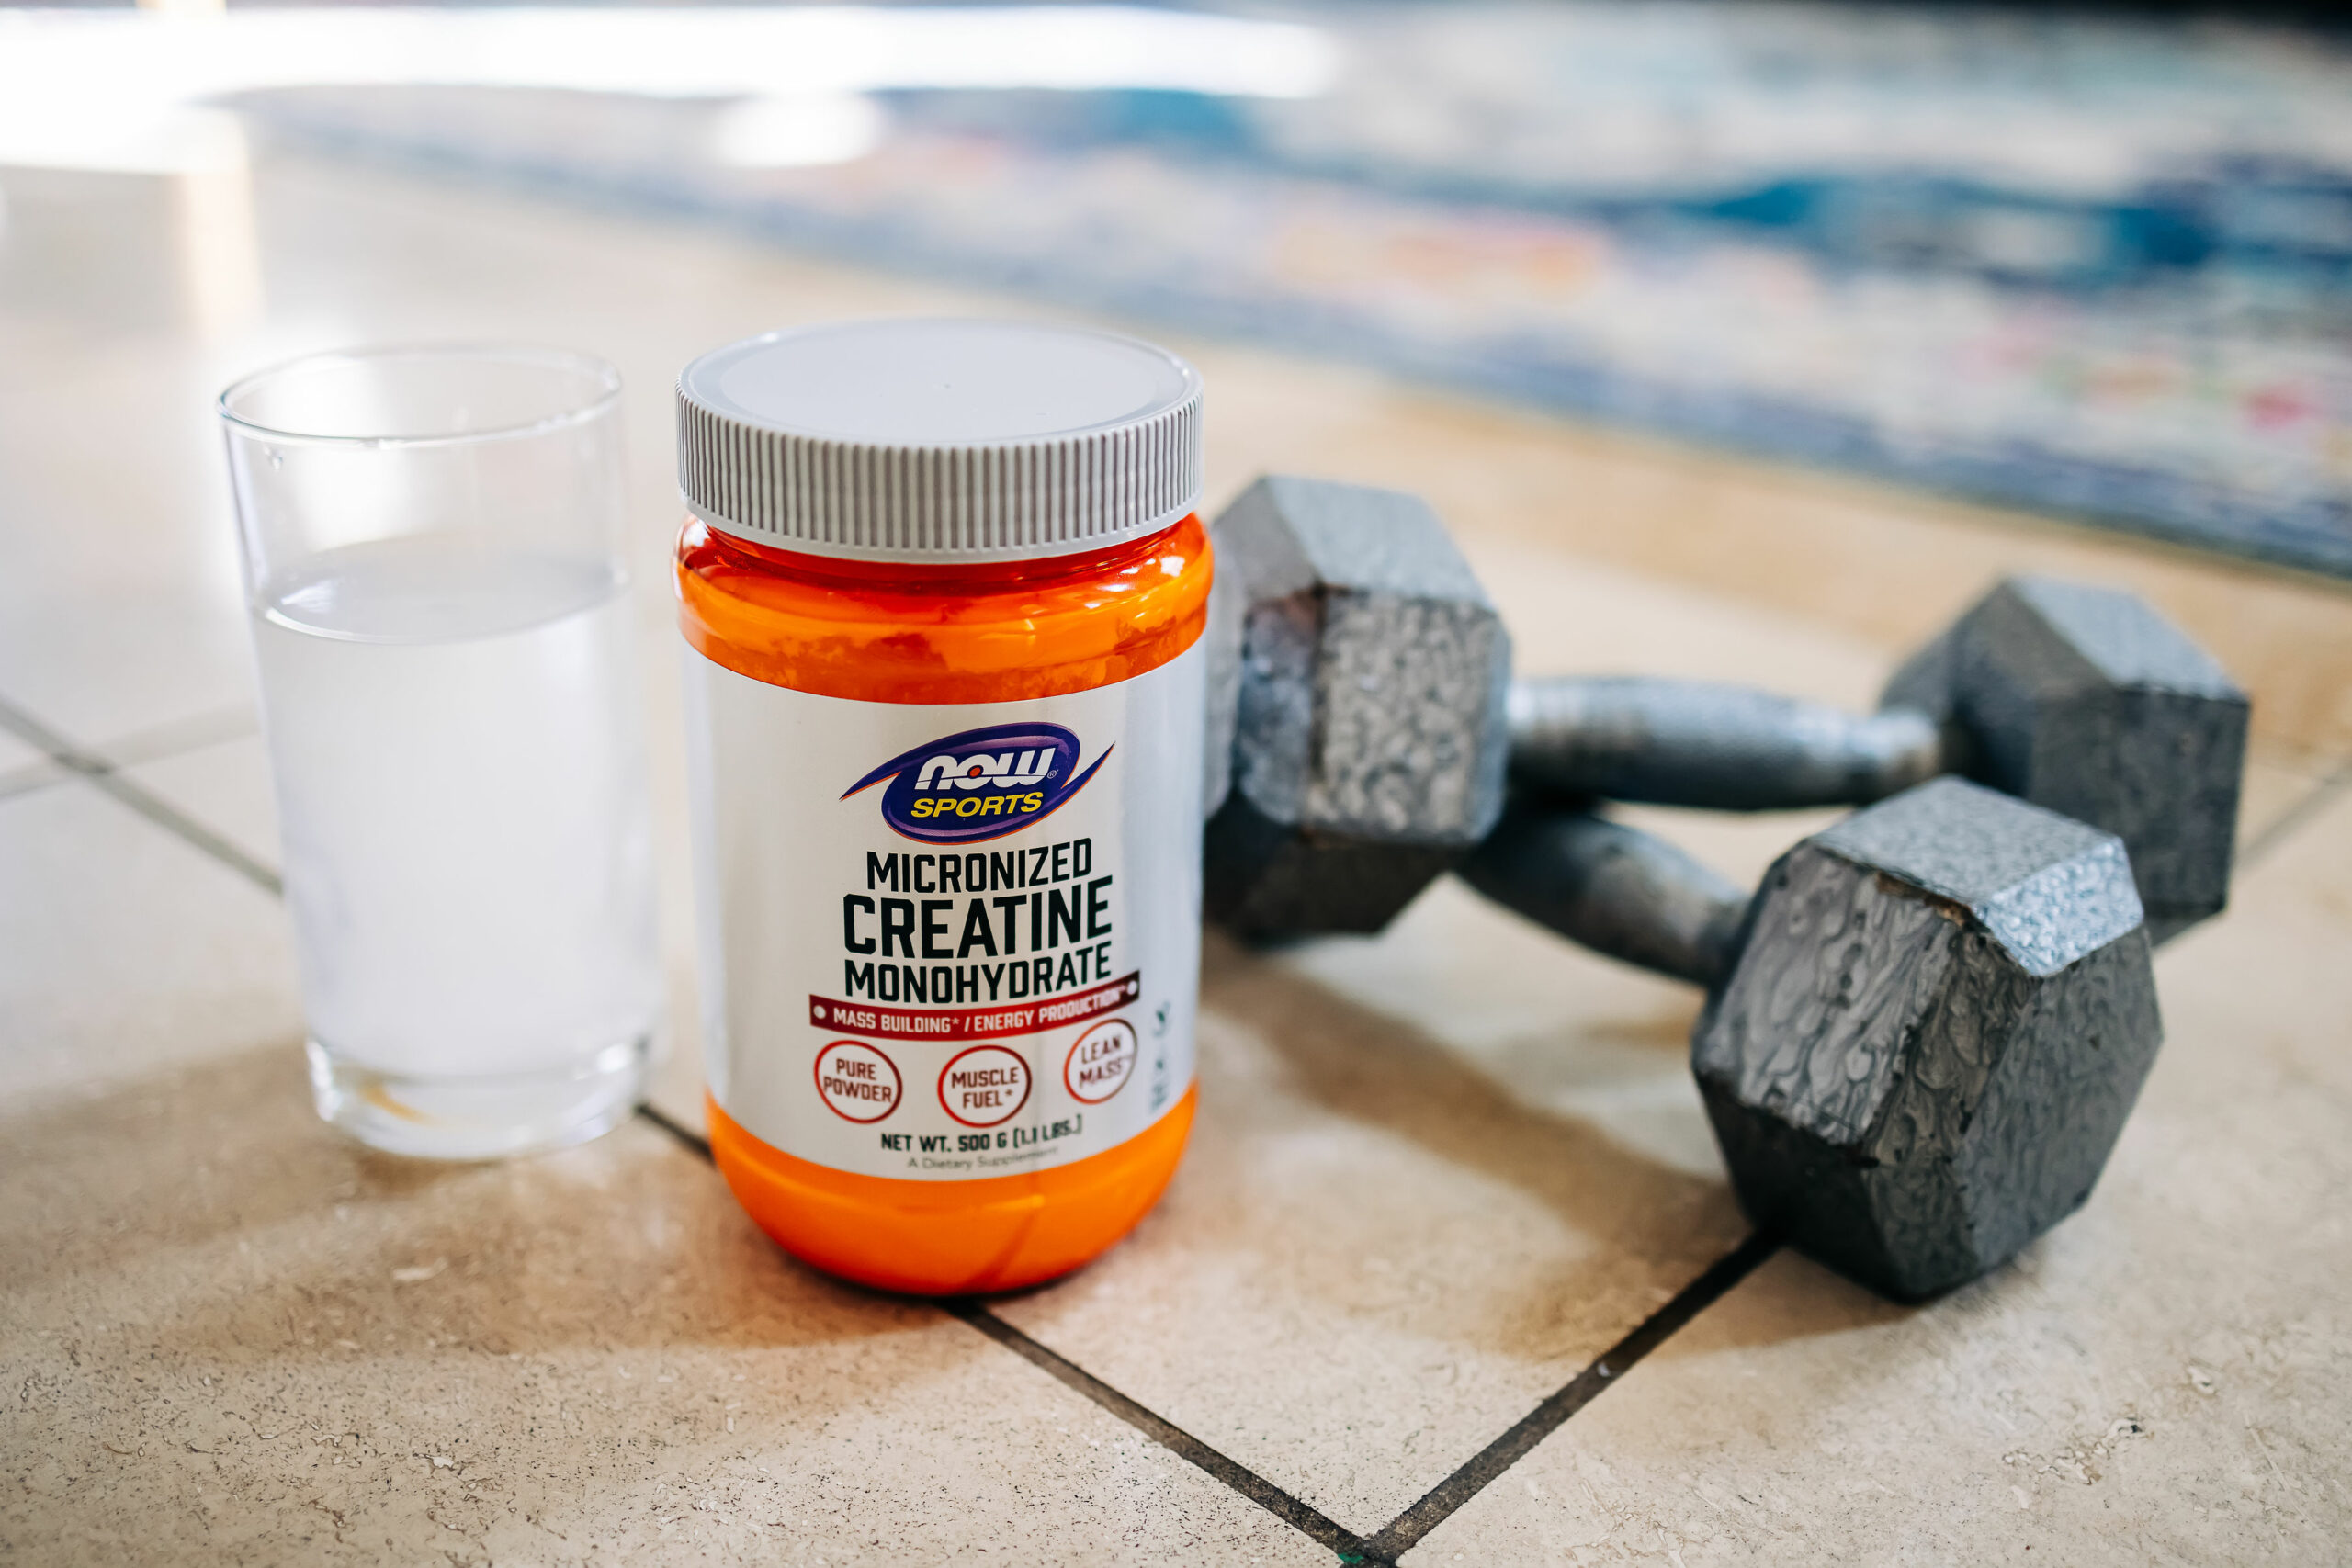 khp16of44 - An Overview on Taking Creatine